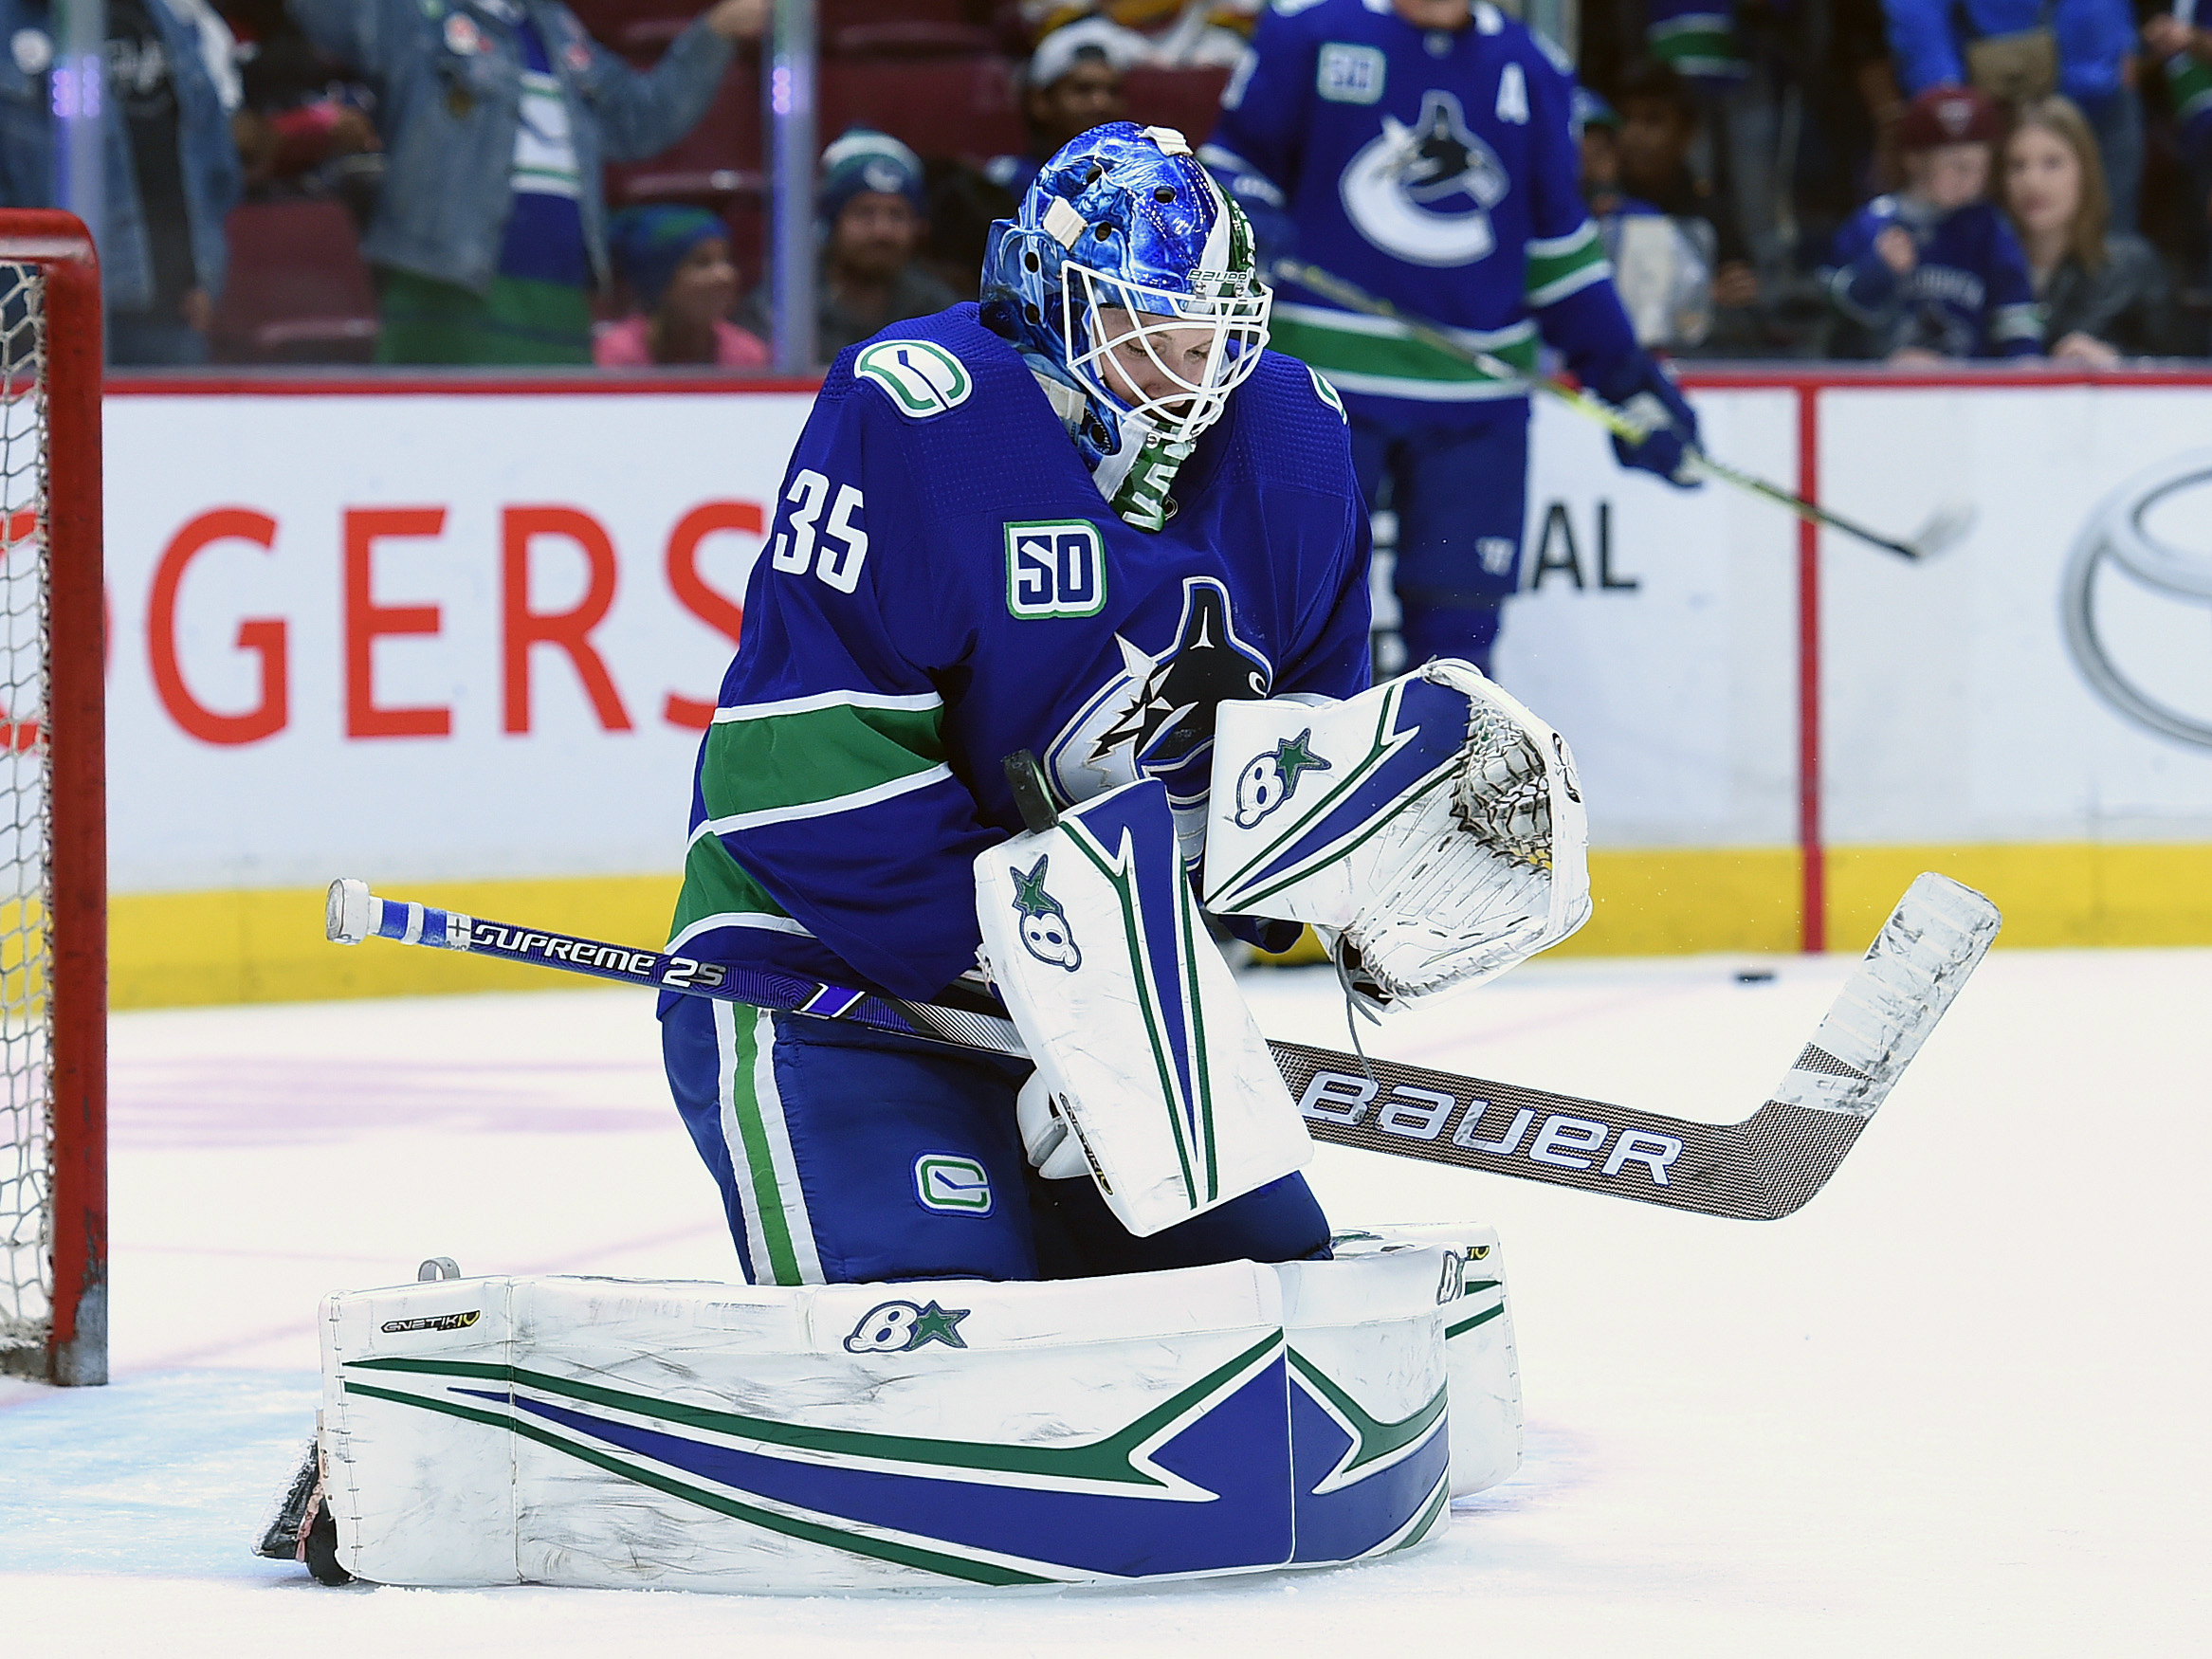 Tocchet: Demko 'really close' to returning in net for Canucks